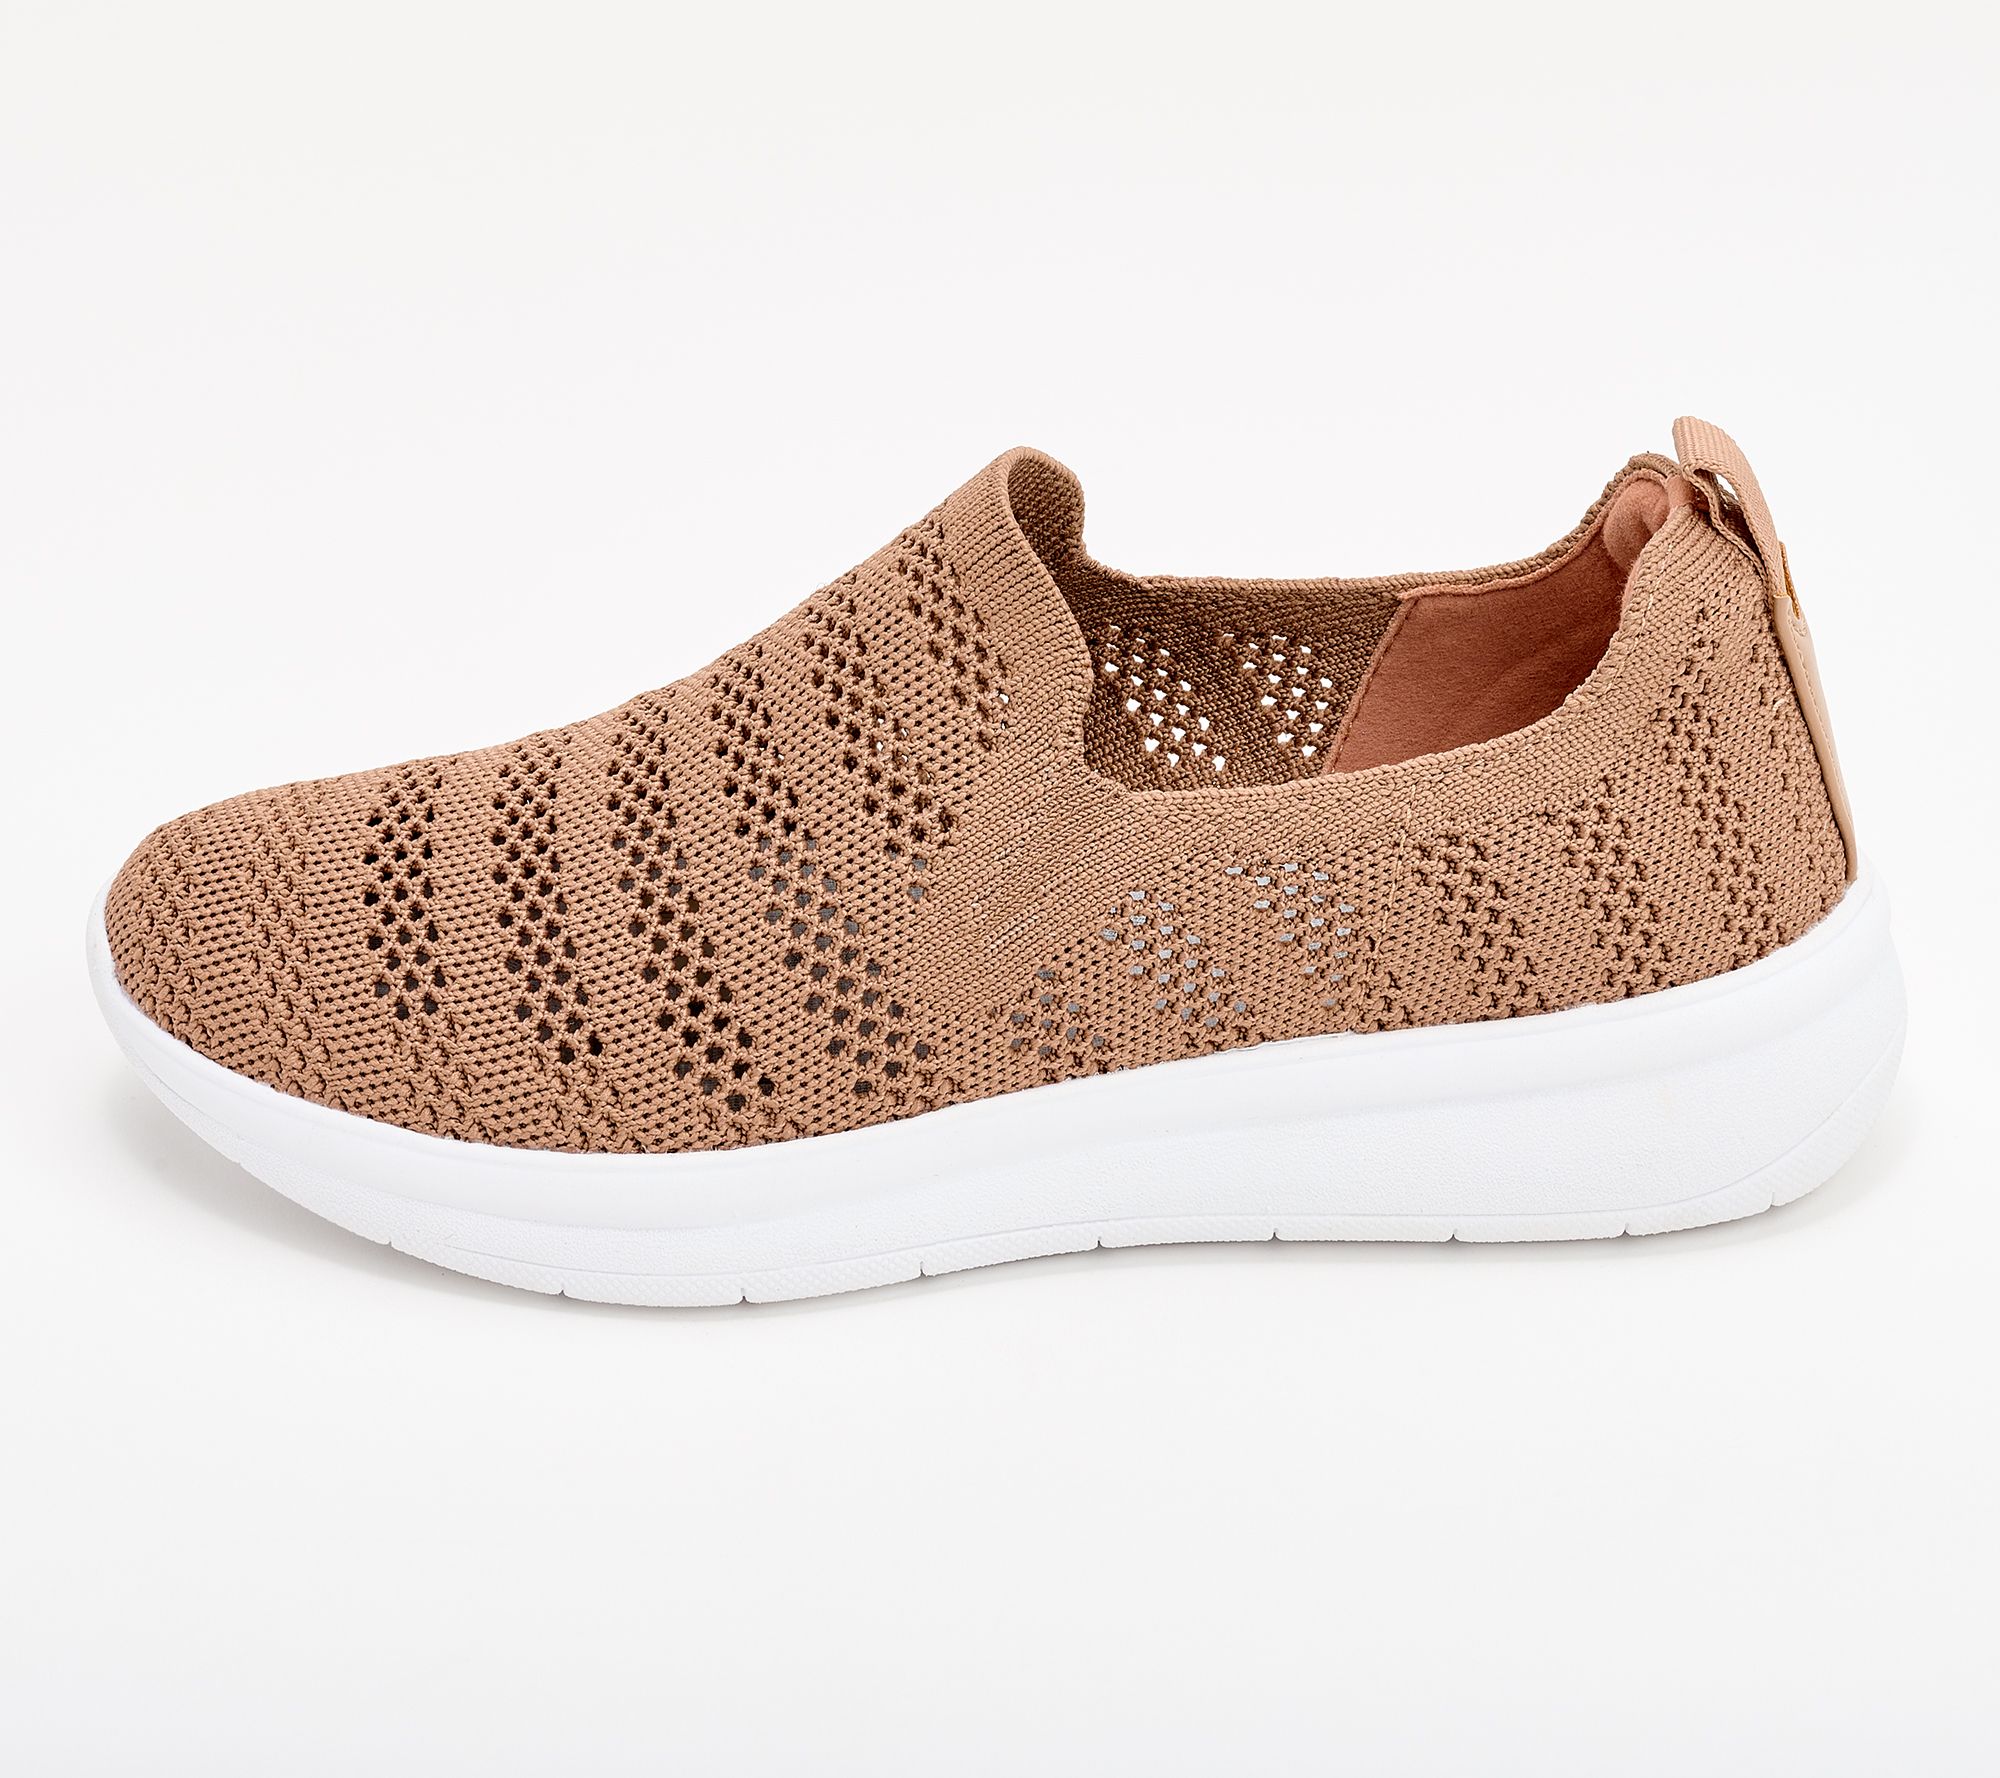 Clarks Cloudsteppers Perforated Knit Slip-Ons - Ezera Path